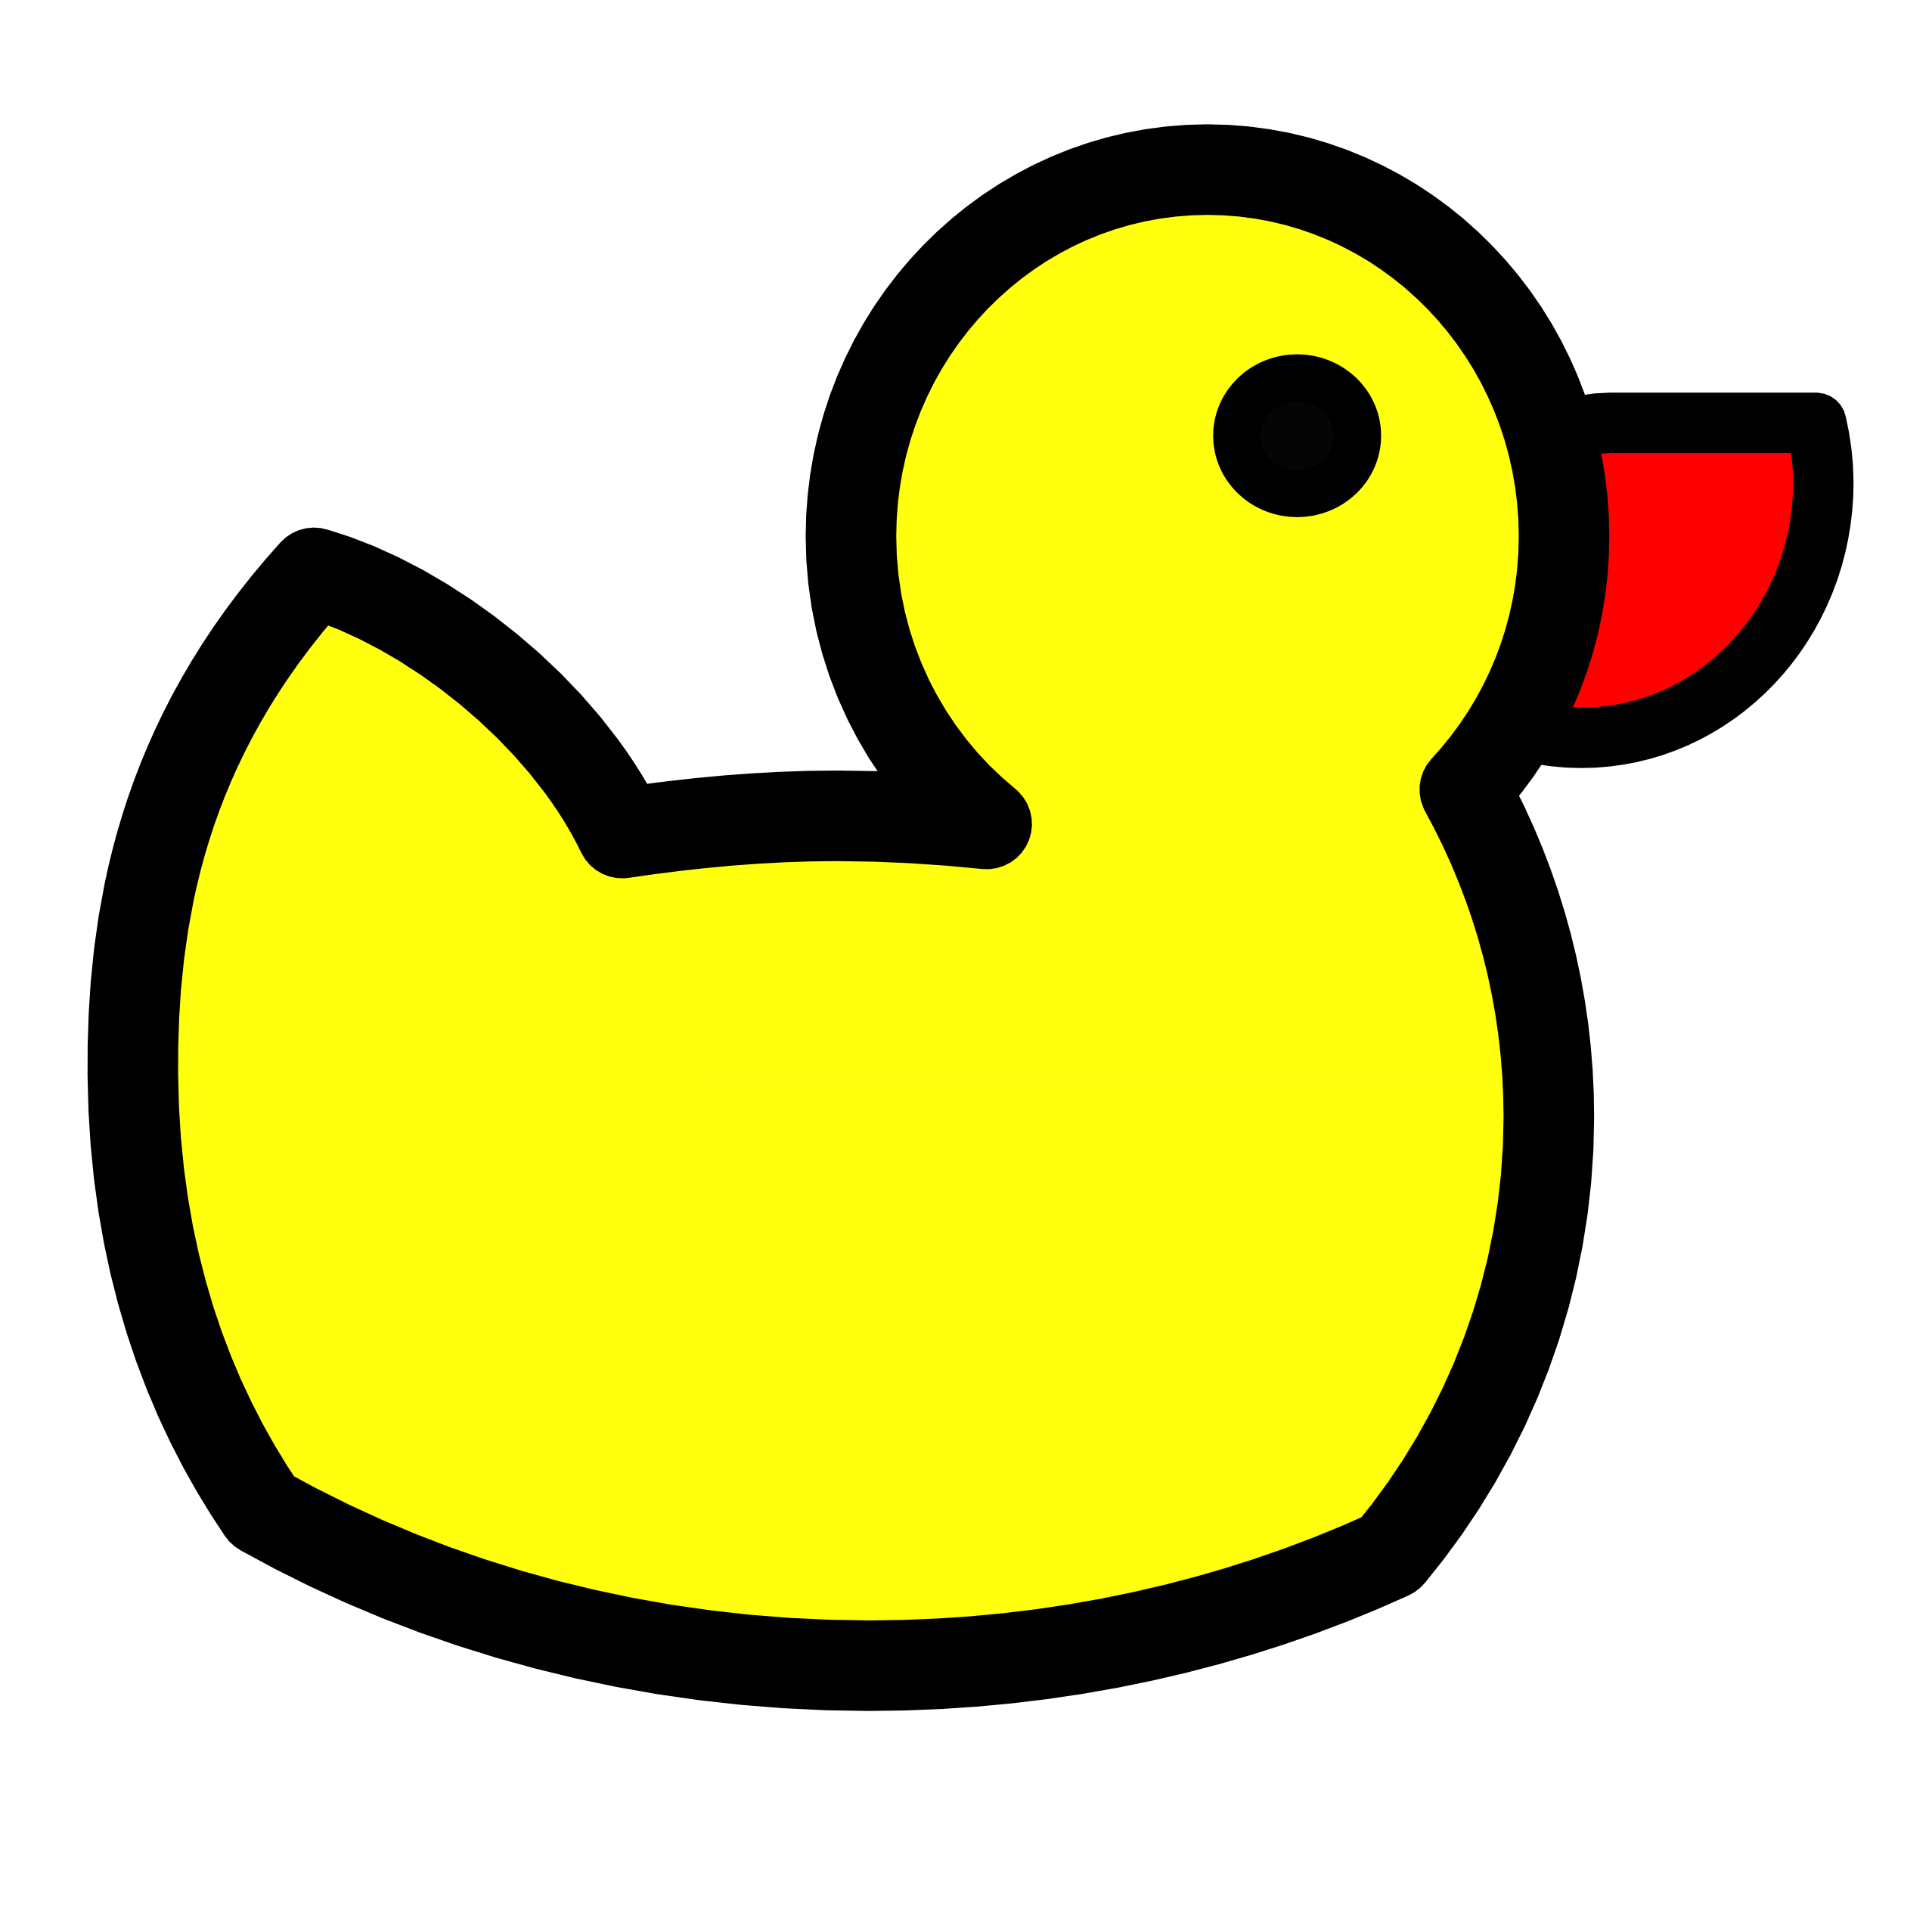 Duck clipart black and white, Duck black and white